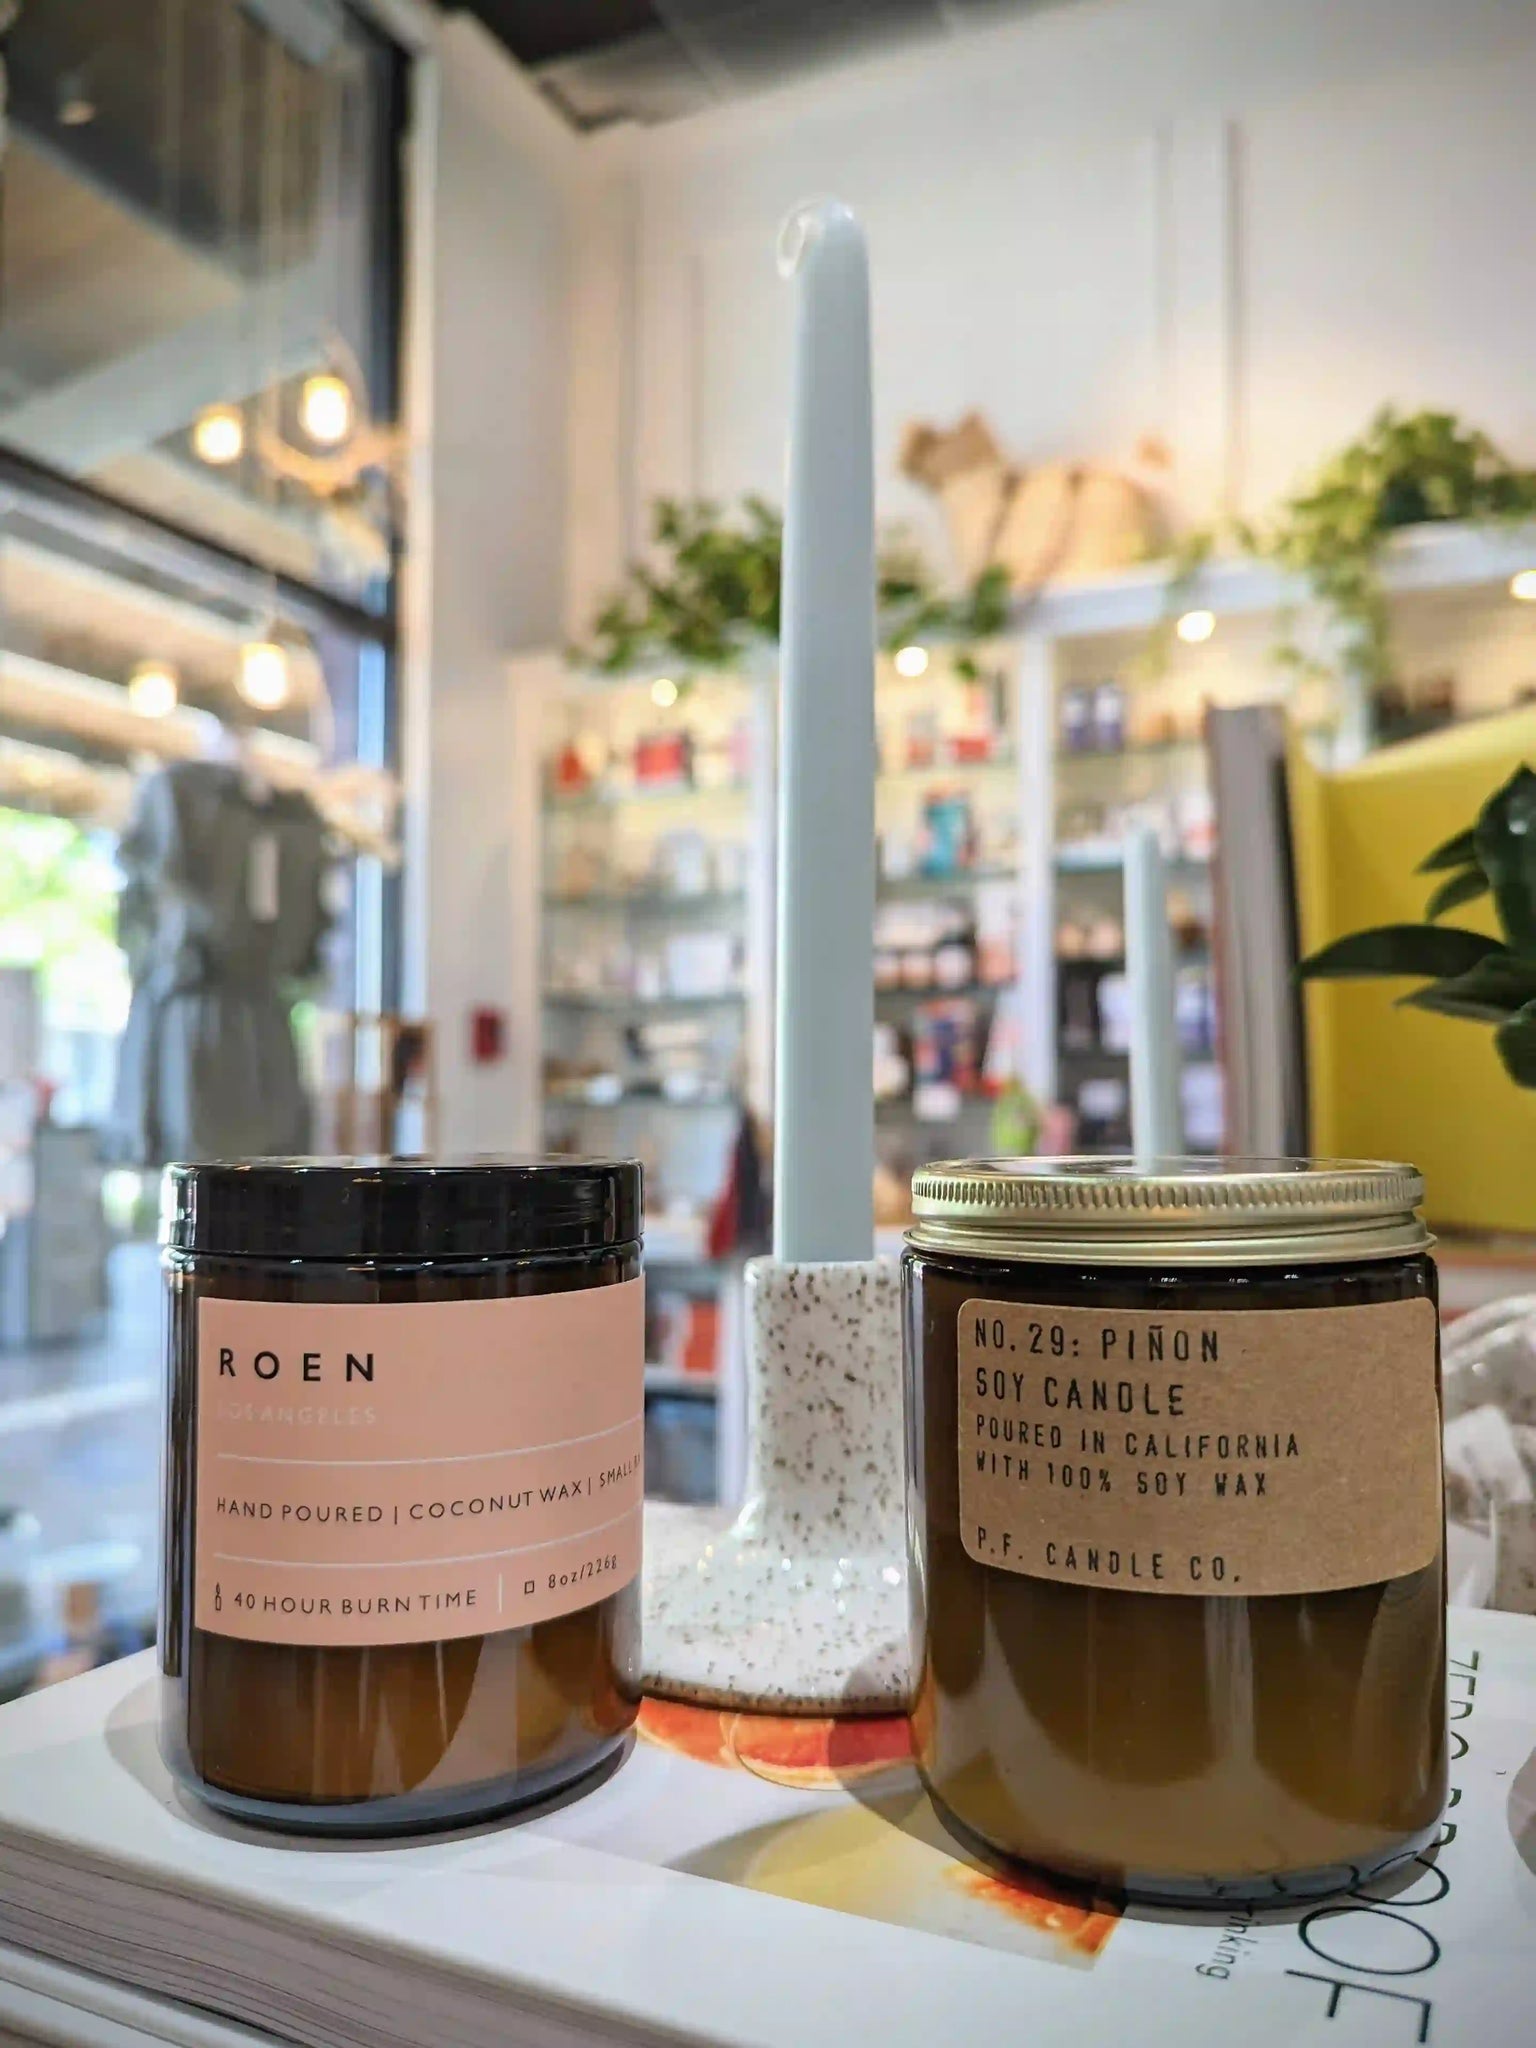 3 candles on top of a book with a store shelf in the background. The candle on the left is a brown jar with a pink label and black lid. The candle in the middle is a tall blue candle stick in a ceramic candlestick holder. The candle on the right is a brown jar with a brown label and a tin lid.